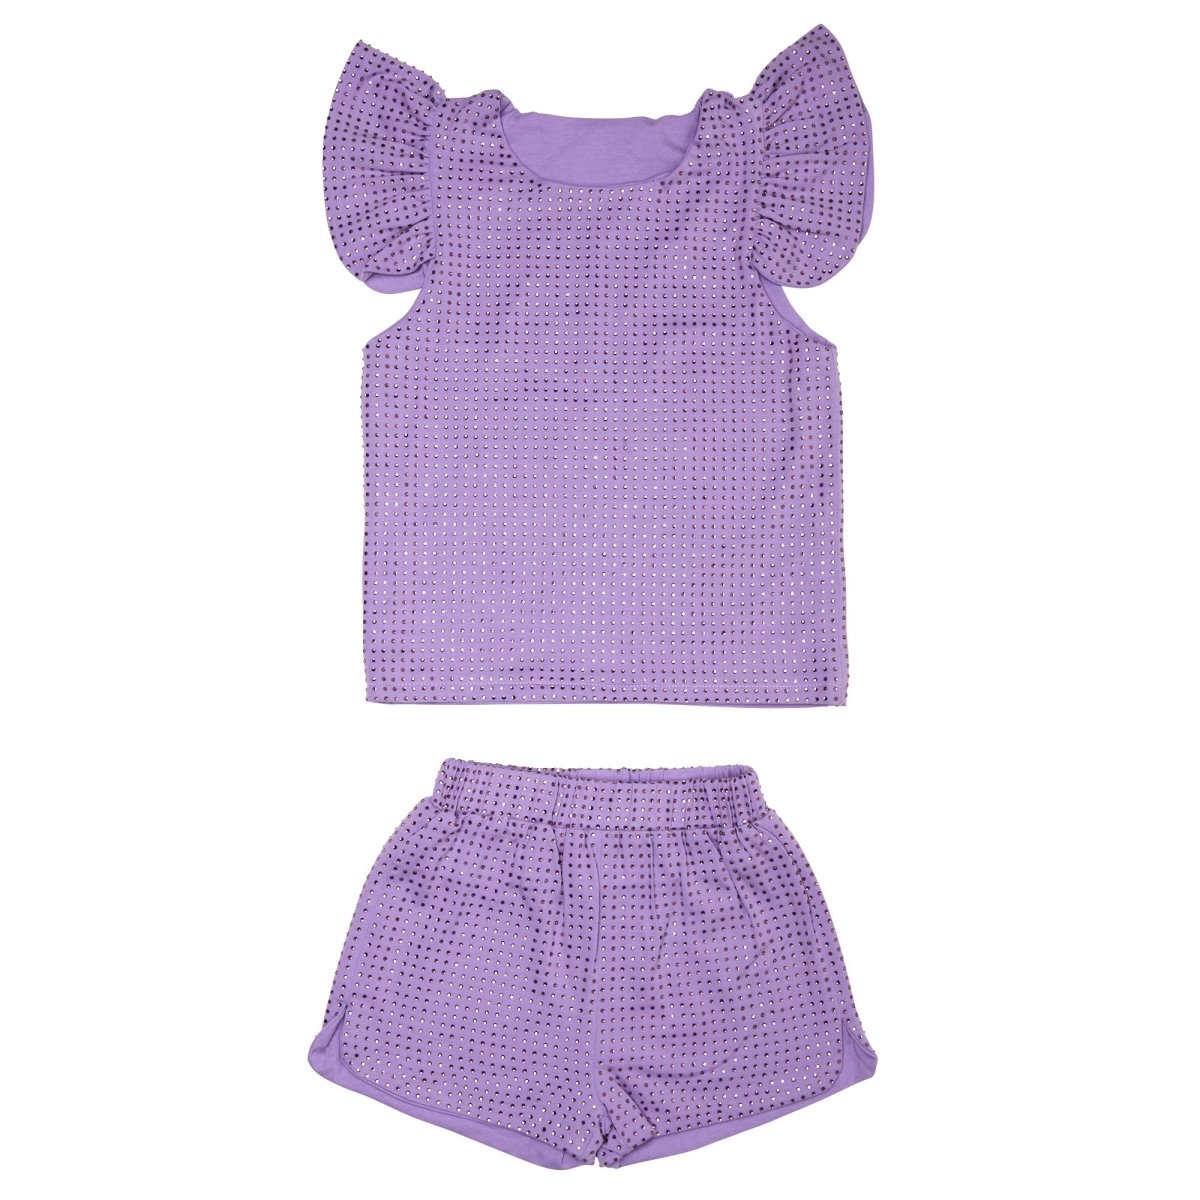 LEXI CRYSTAL RUFFLE TOP AND SHORTS SET (PREORDER) - MINI DREAMERS